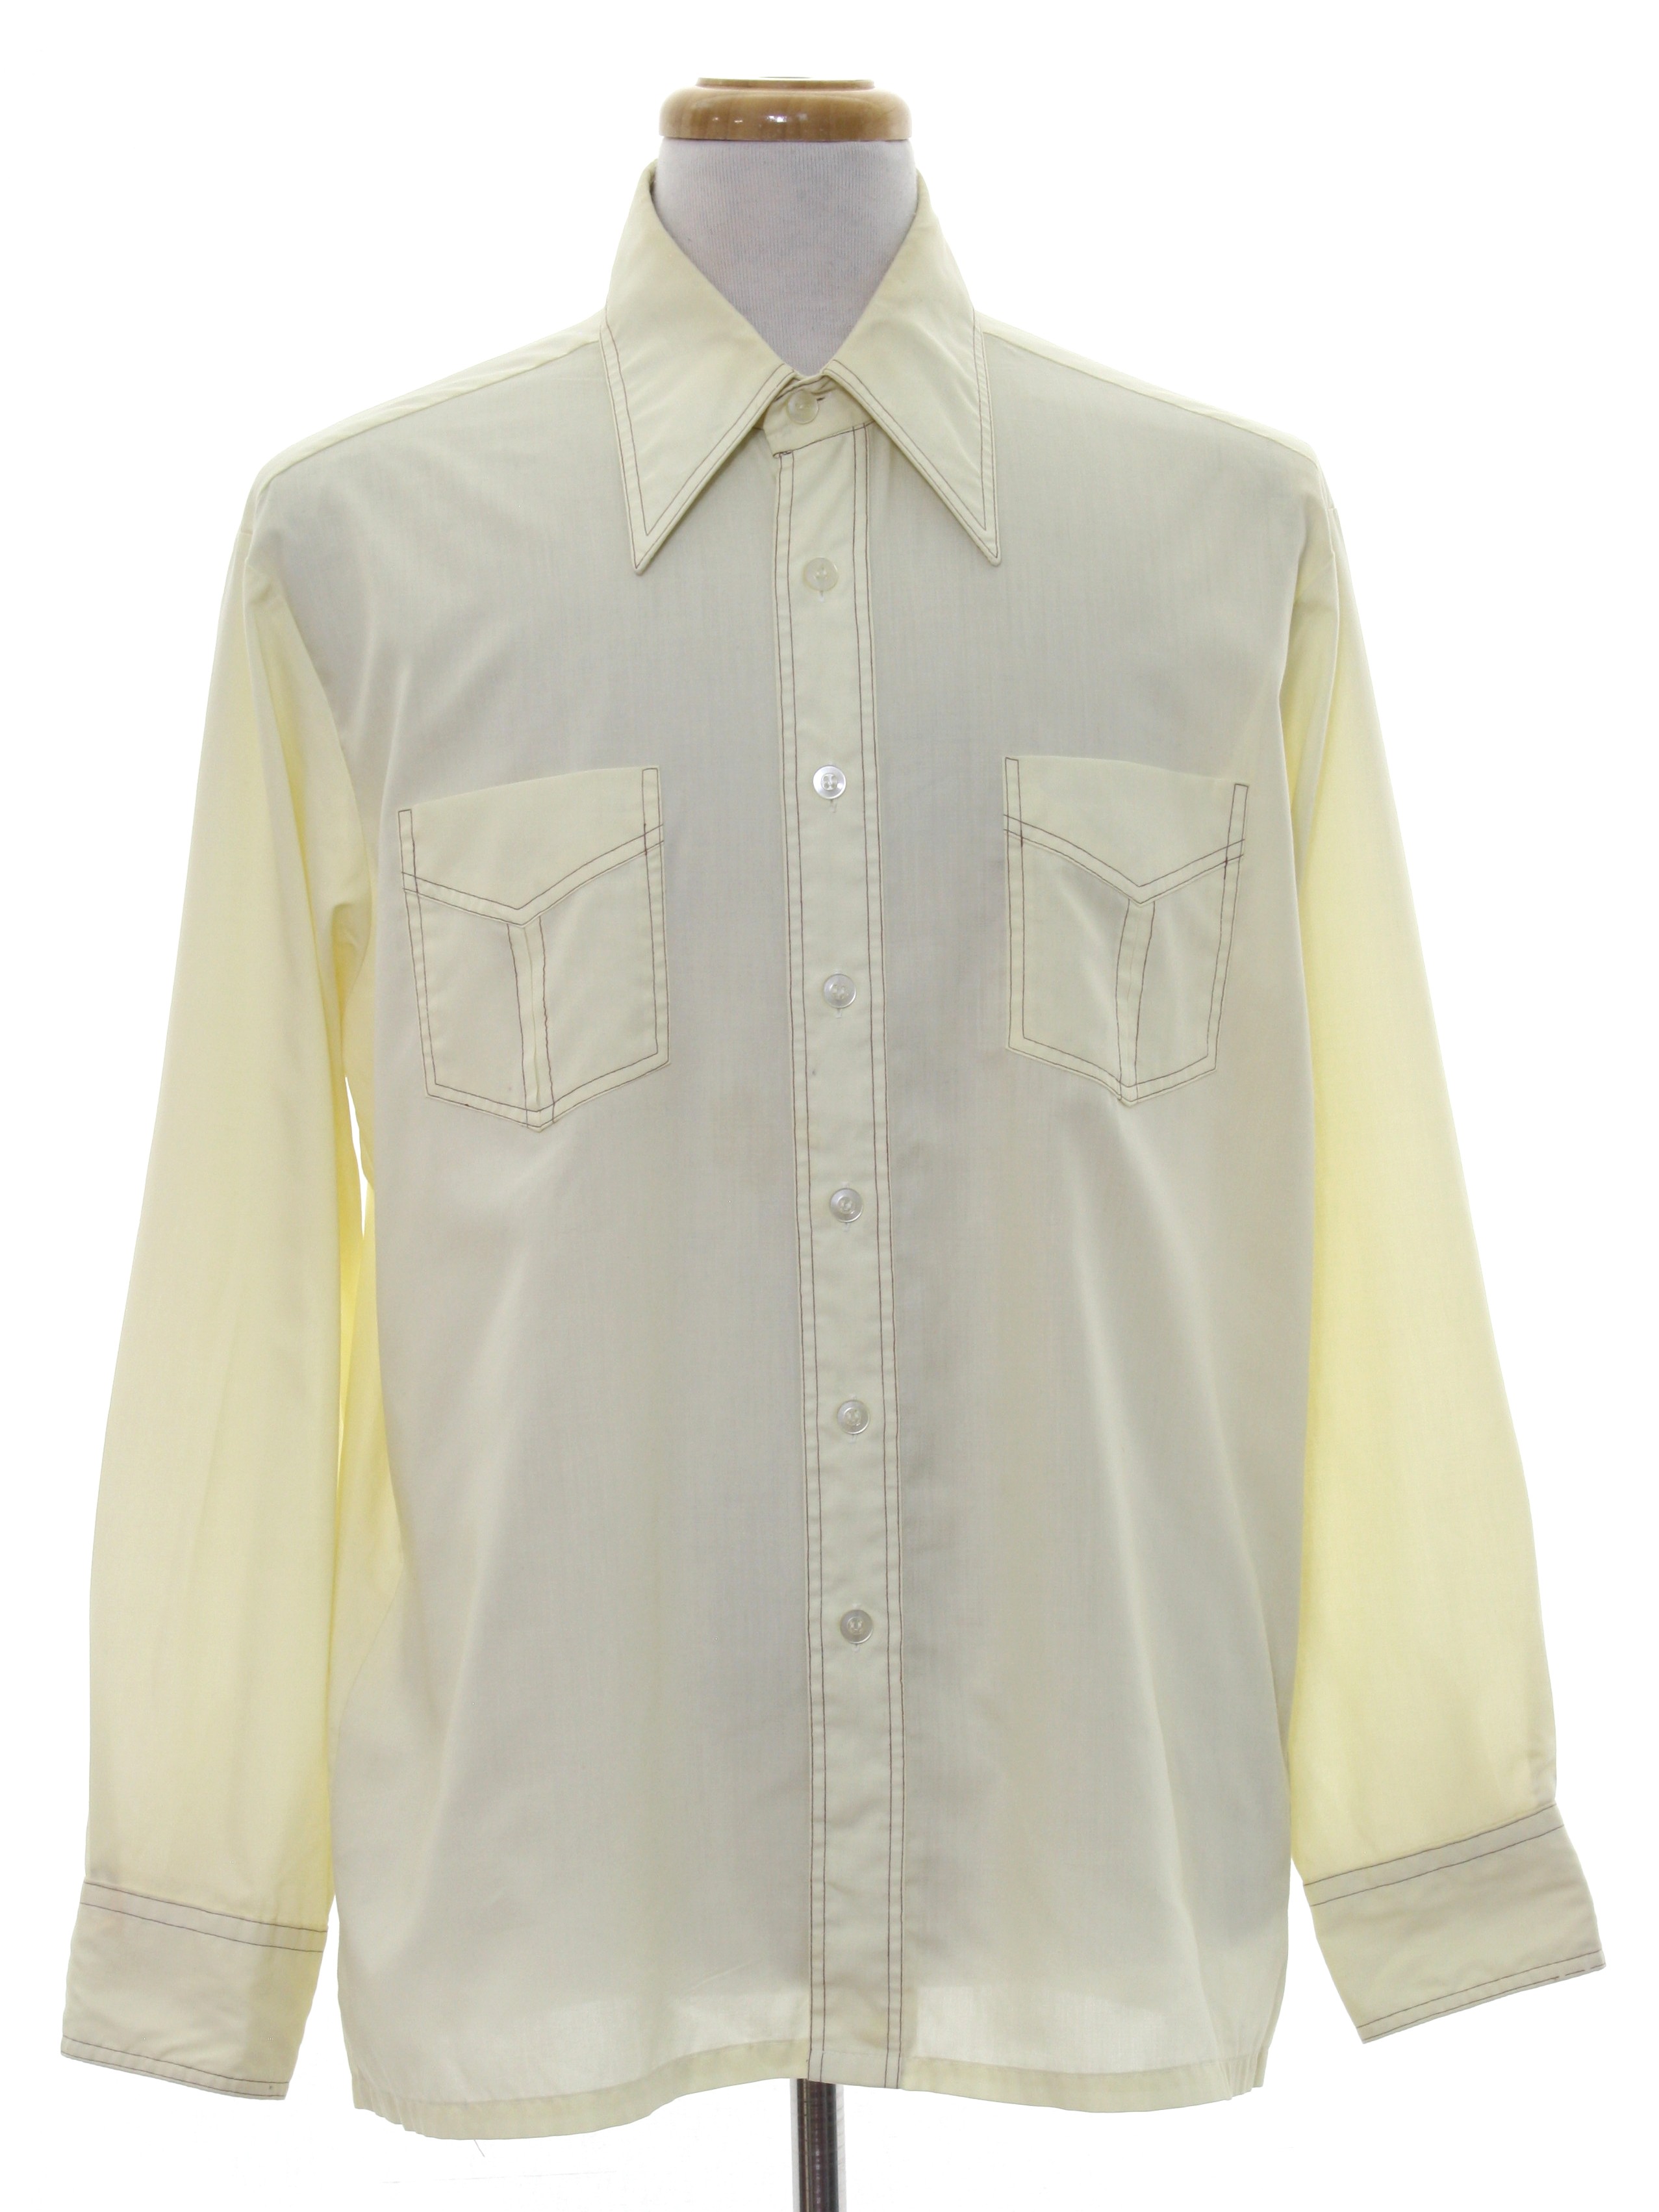 Retro 70s Shirt (JCPenney) : 70s -JCPenney- Mens baby yellow blended ...